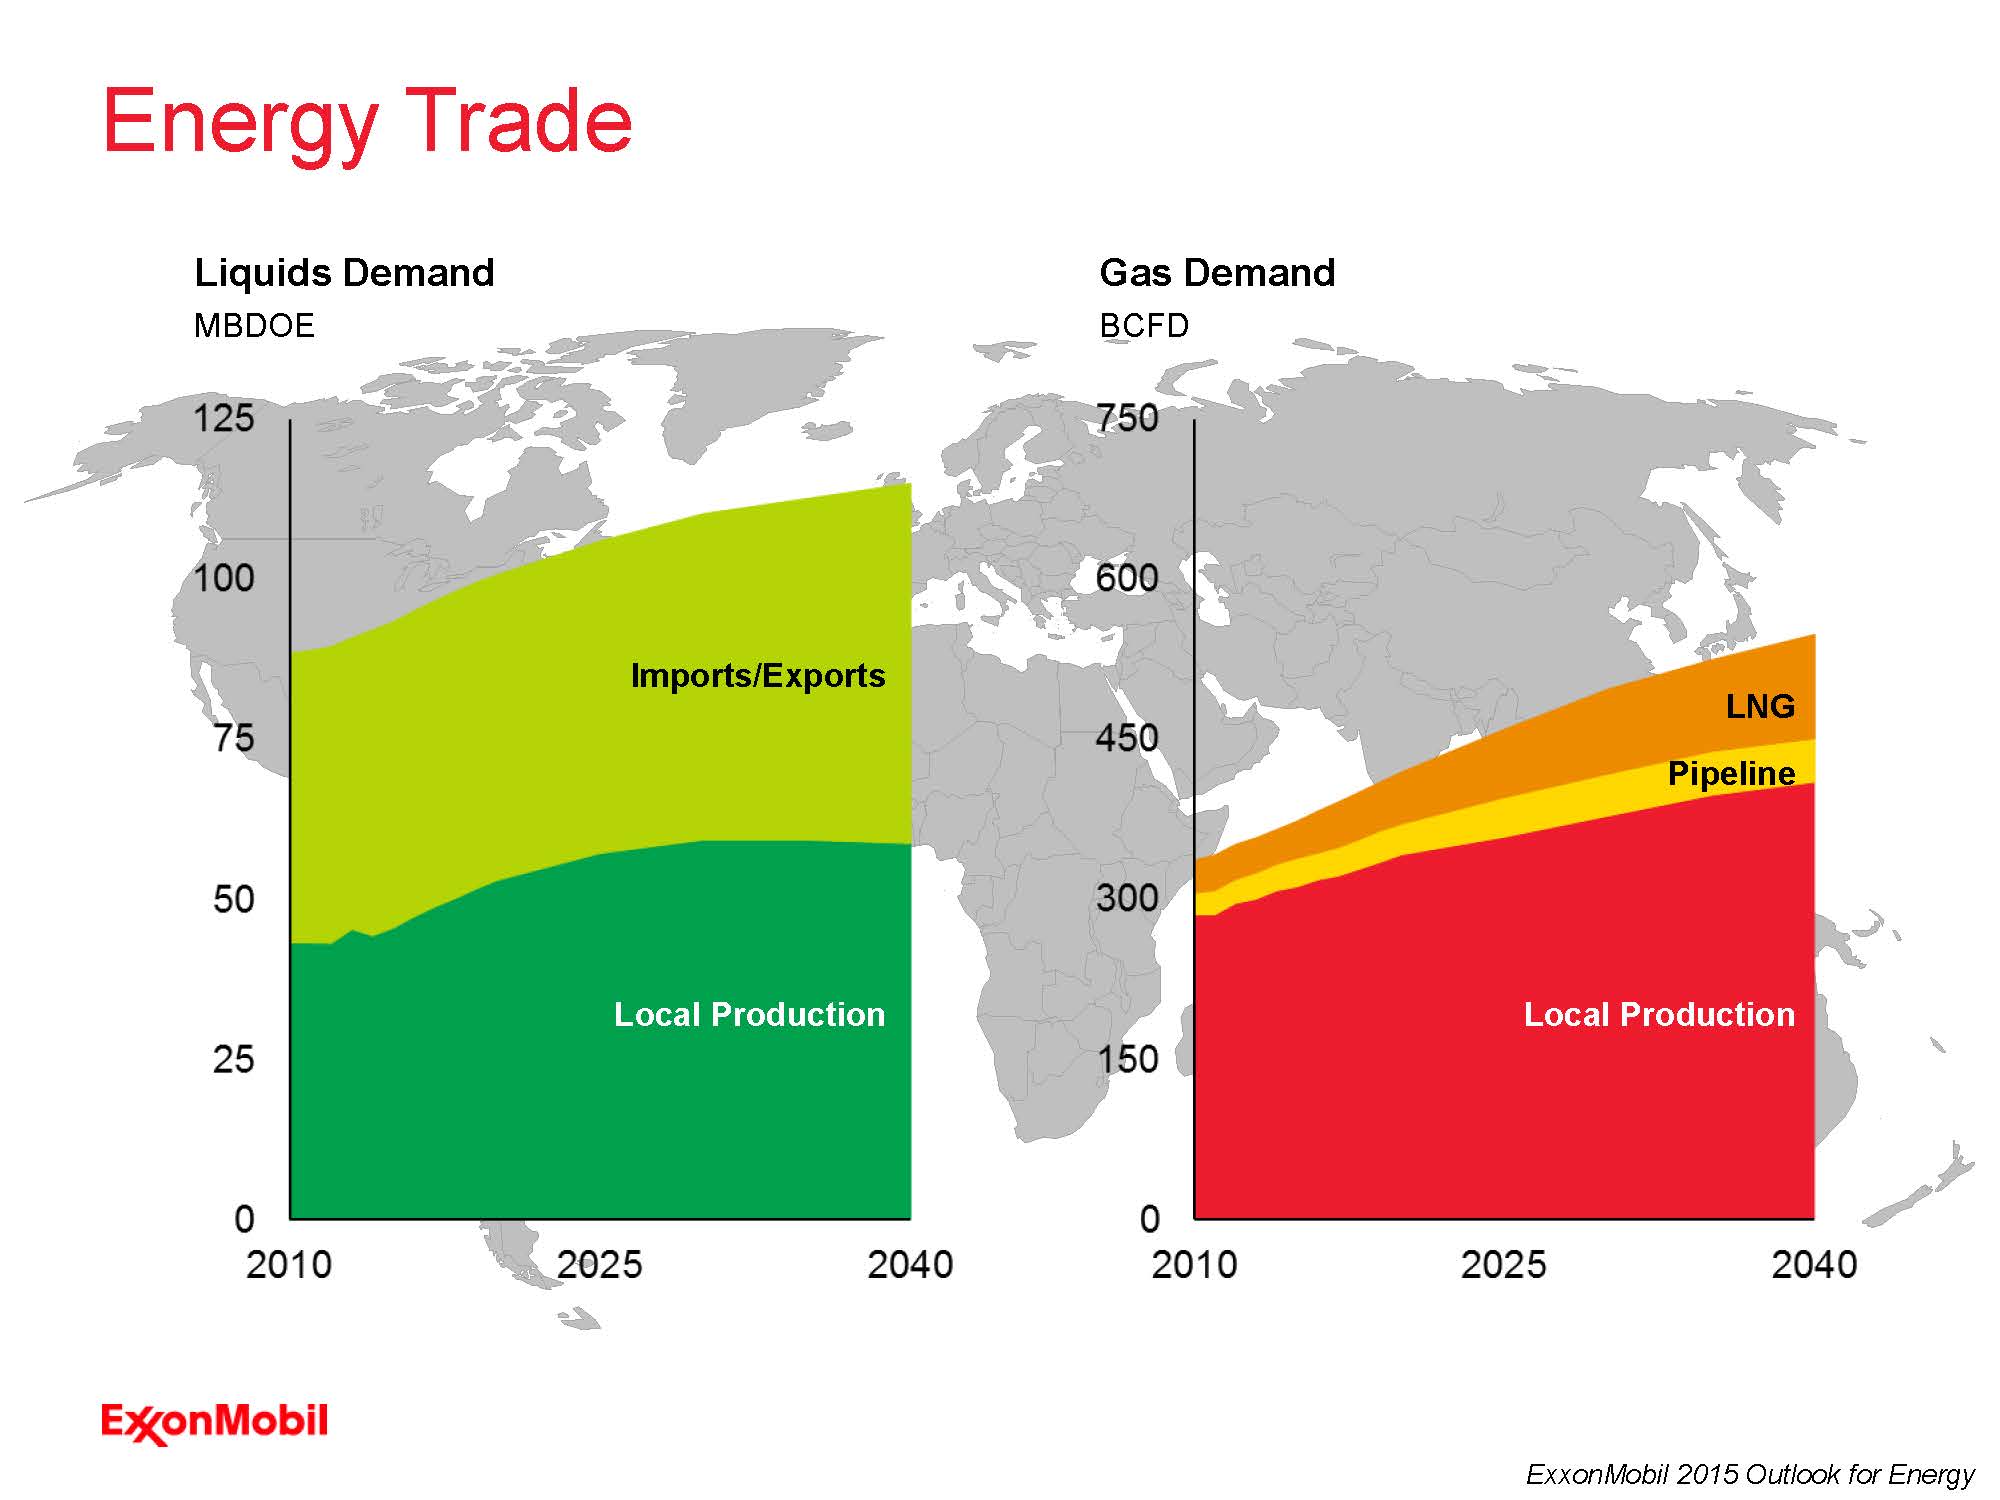 EXXONMOBIL Outlook for Energy. EXXONMOBIL Energy Outlook 2050. Demand for Imports это. 2040 Oil and Gas demand and Supply Forecast. Energy report